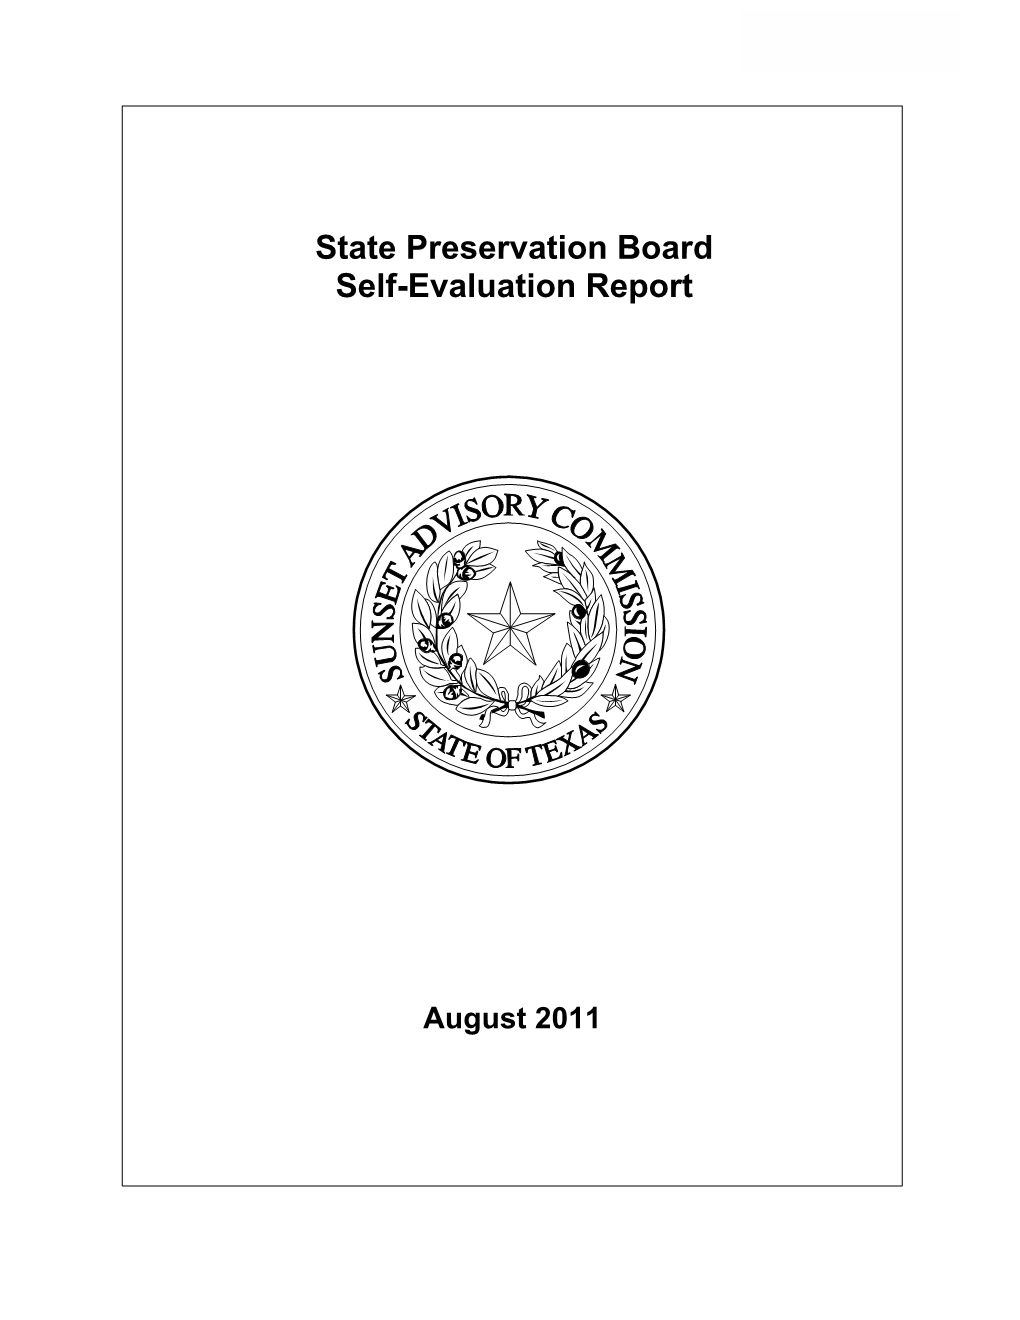 State Preservation Board Self-Evaluation Report